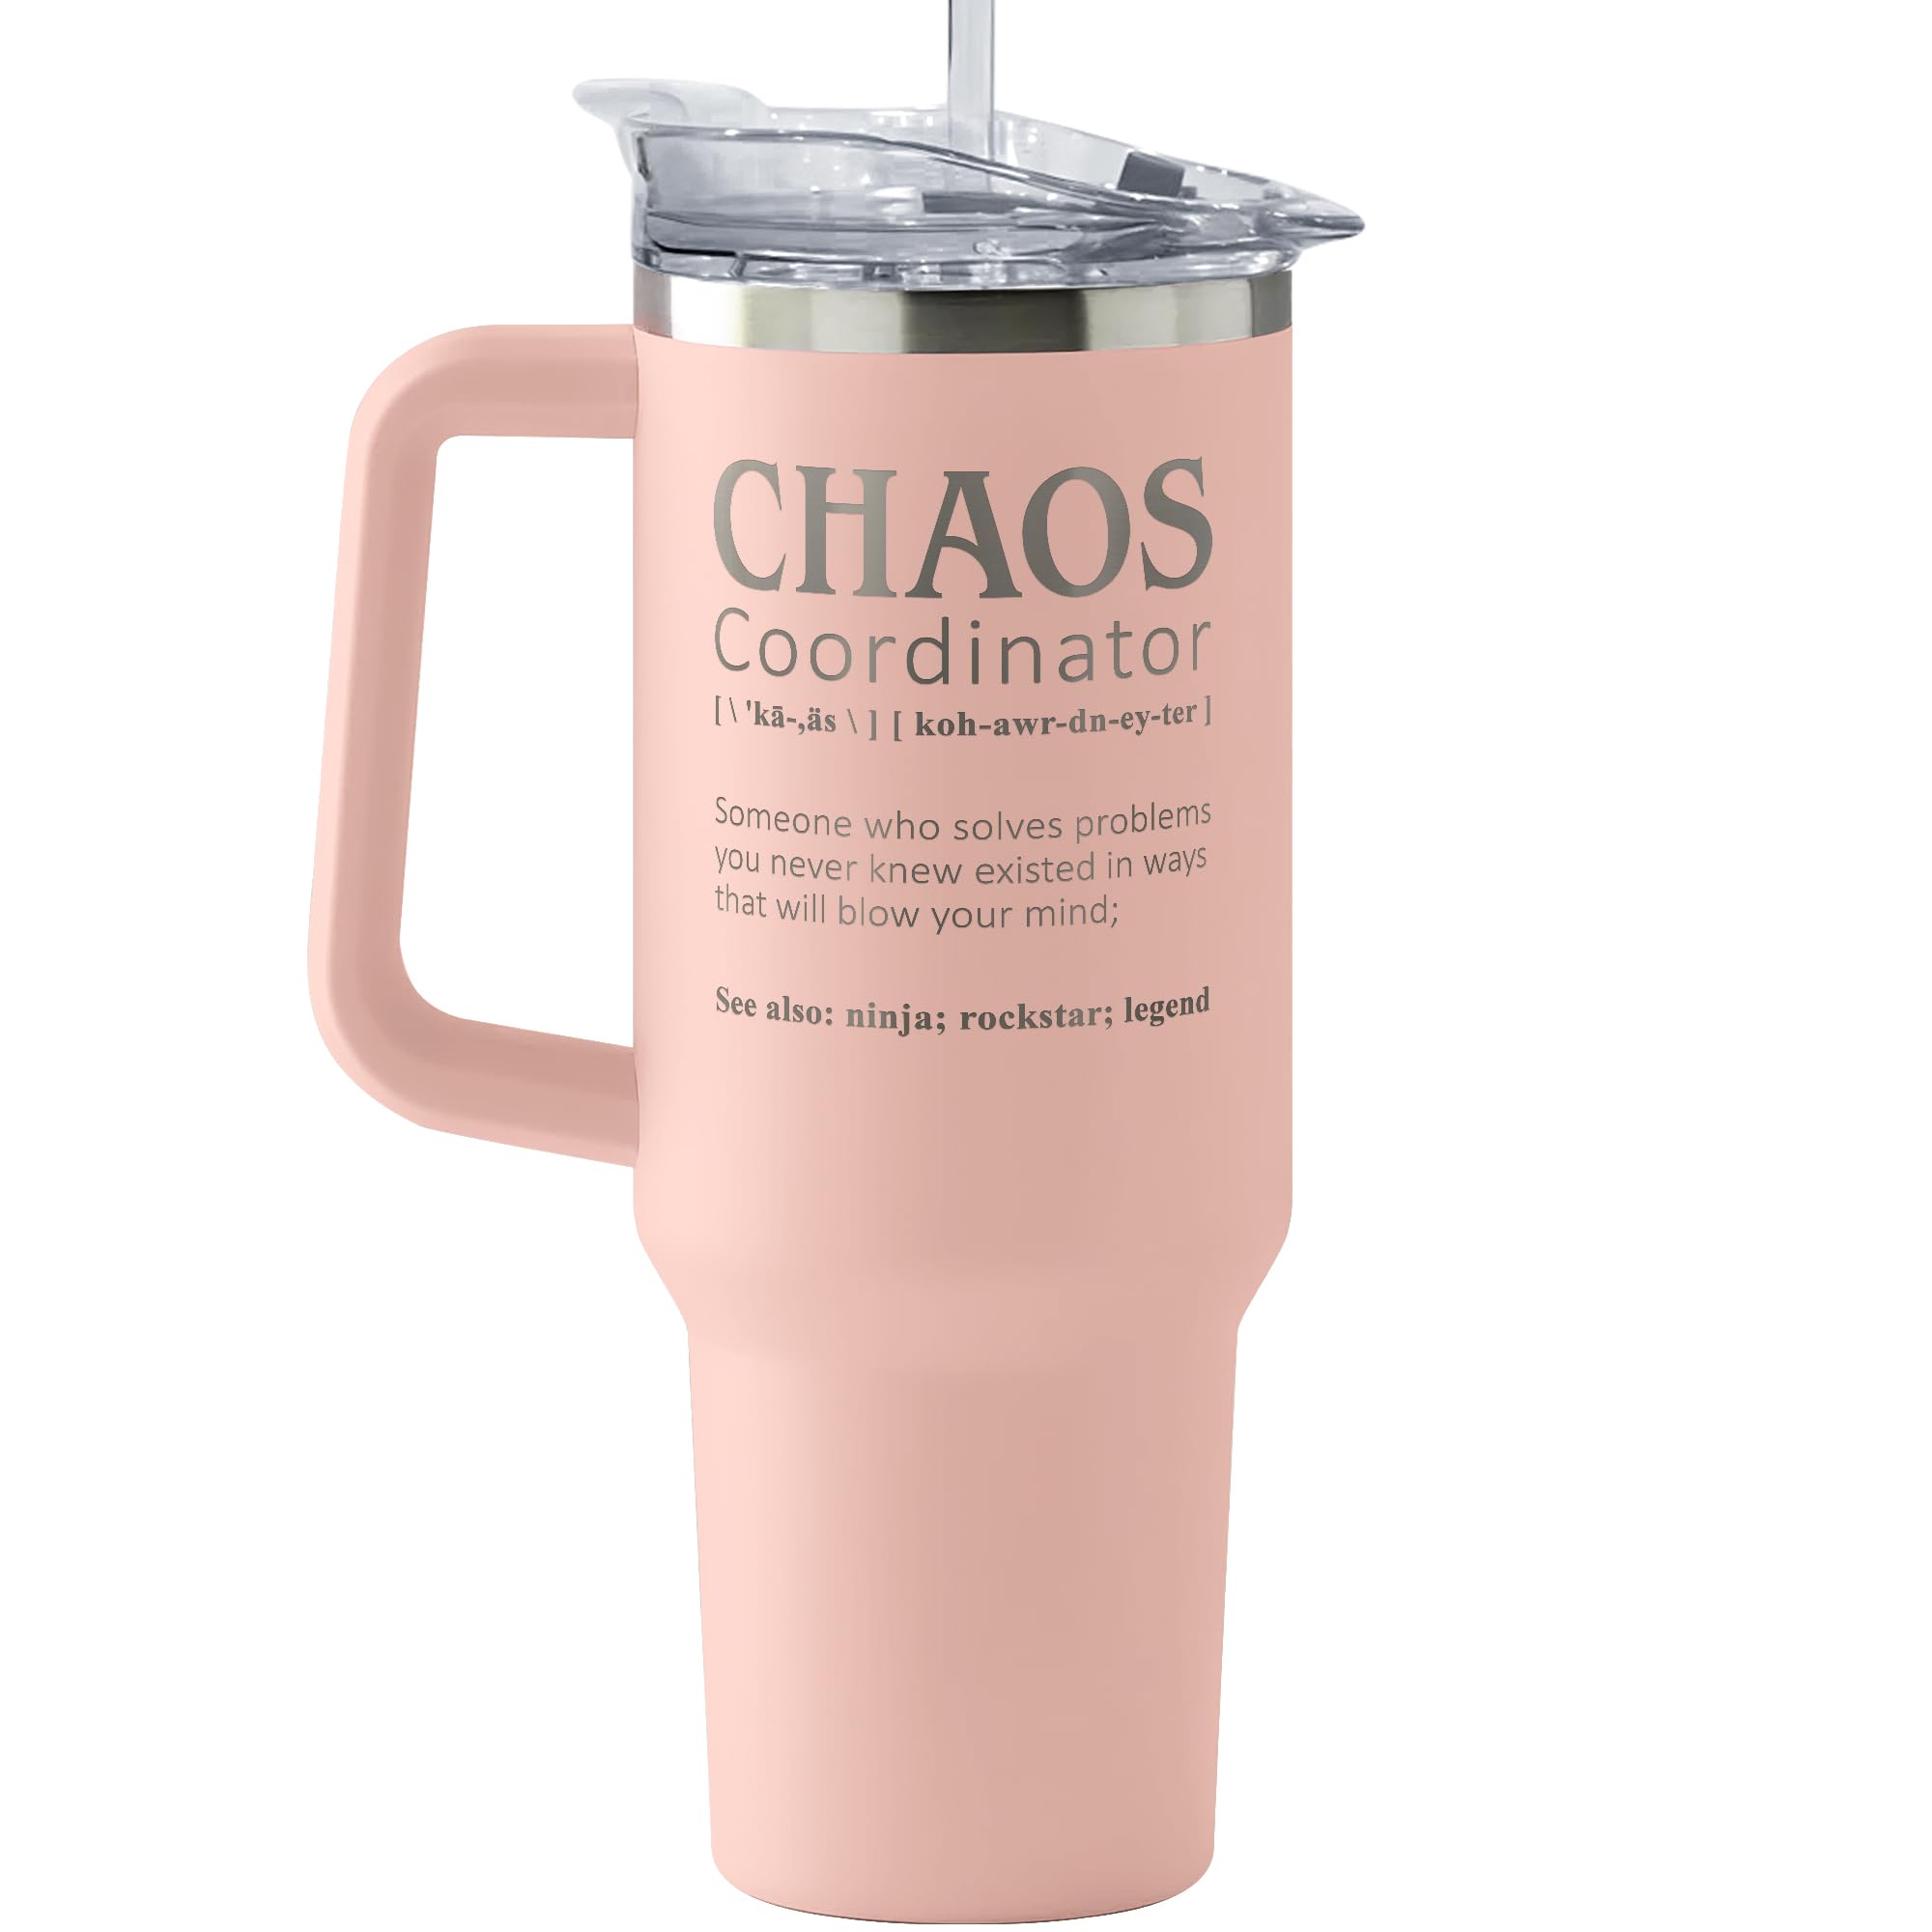 Thank You Gifts for Women, Boss, Coworker, Manager, Office, Teacher - Chaos Coordinator Gifts, Boss Lady Gifts - Administrative Professional Day Gifts - Teacher Appreciation Gifts - 40 Oz Tumbler